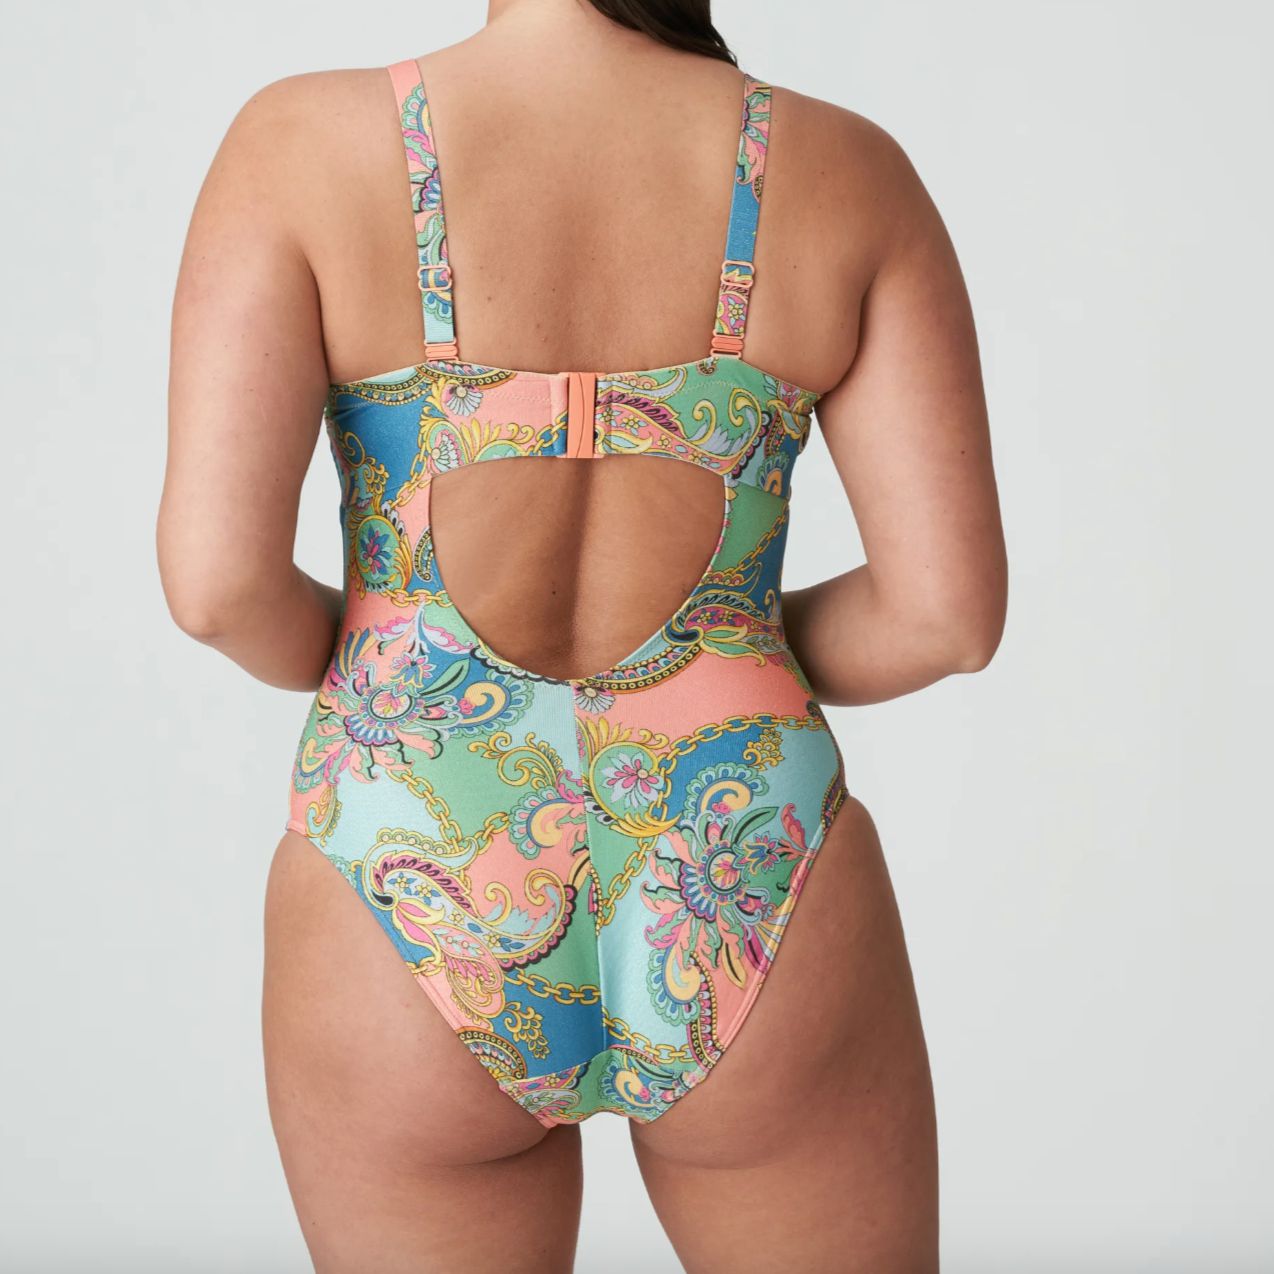 Prima Donna Celaya Swimsuit 4011241 in Italian Chic-Swimwear-Prima Donna-Italian Chic-34-D-Anna Bella Fine Lingerie, Reveal Your Most Gorgeous Self!